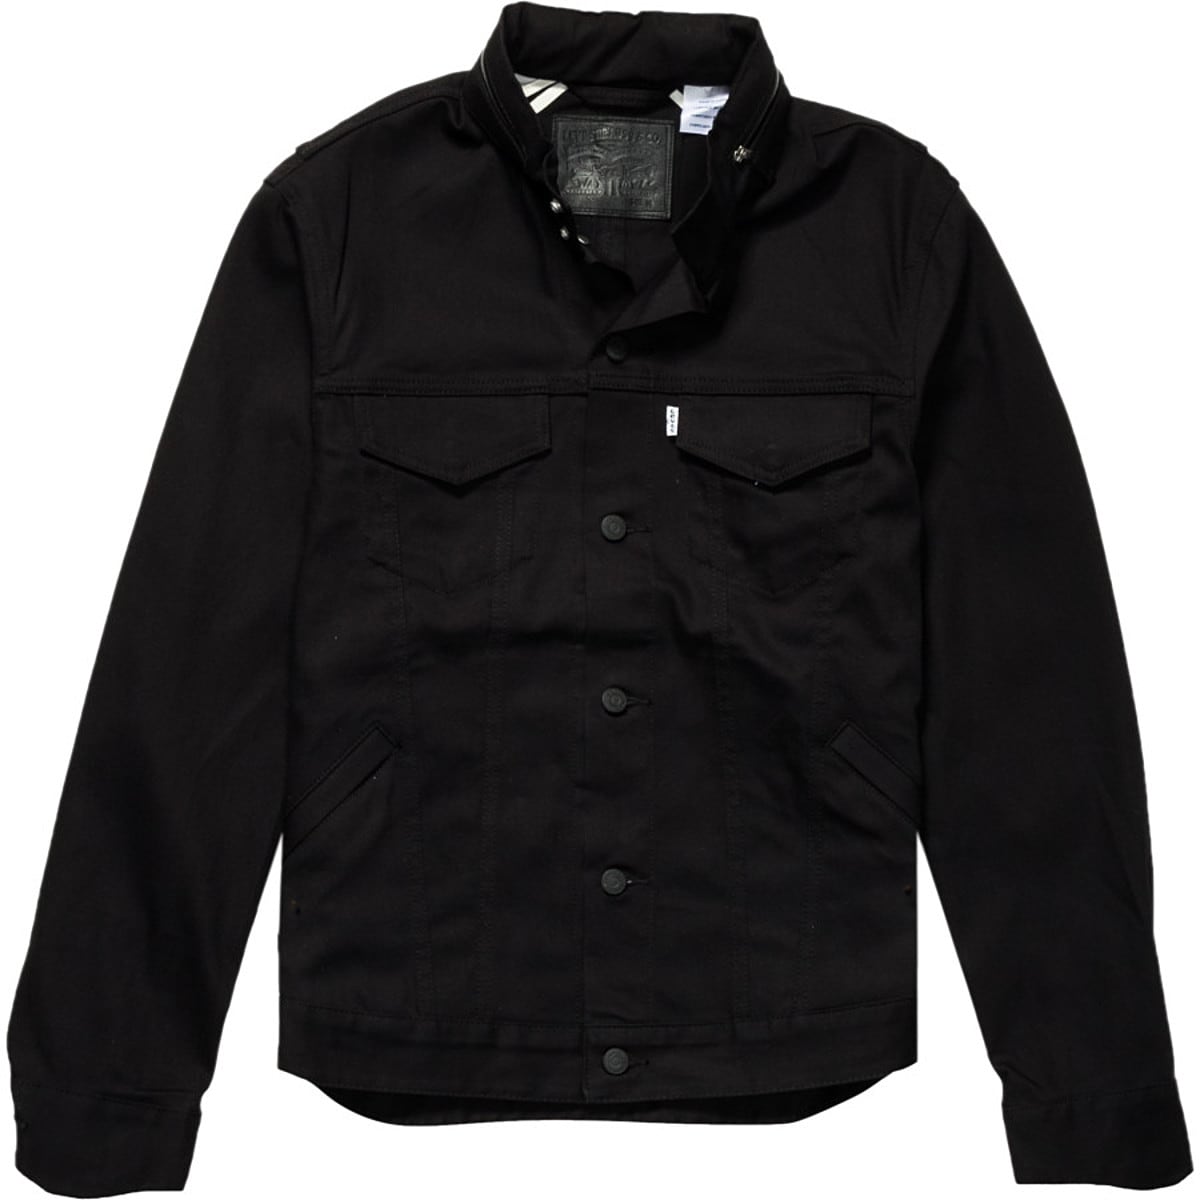 Levi's Commuter Series Hooded Trucker 2.0 Jacket - Clothing